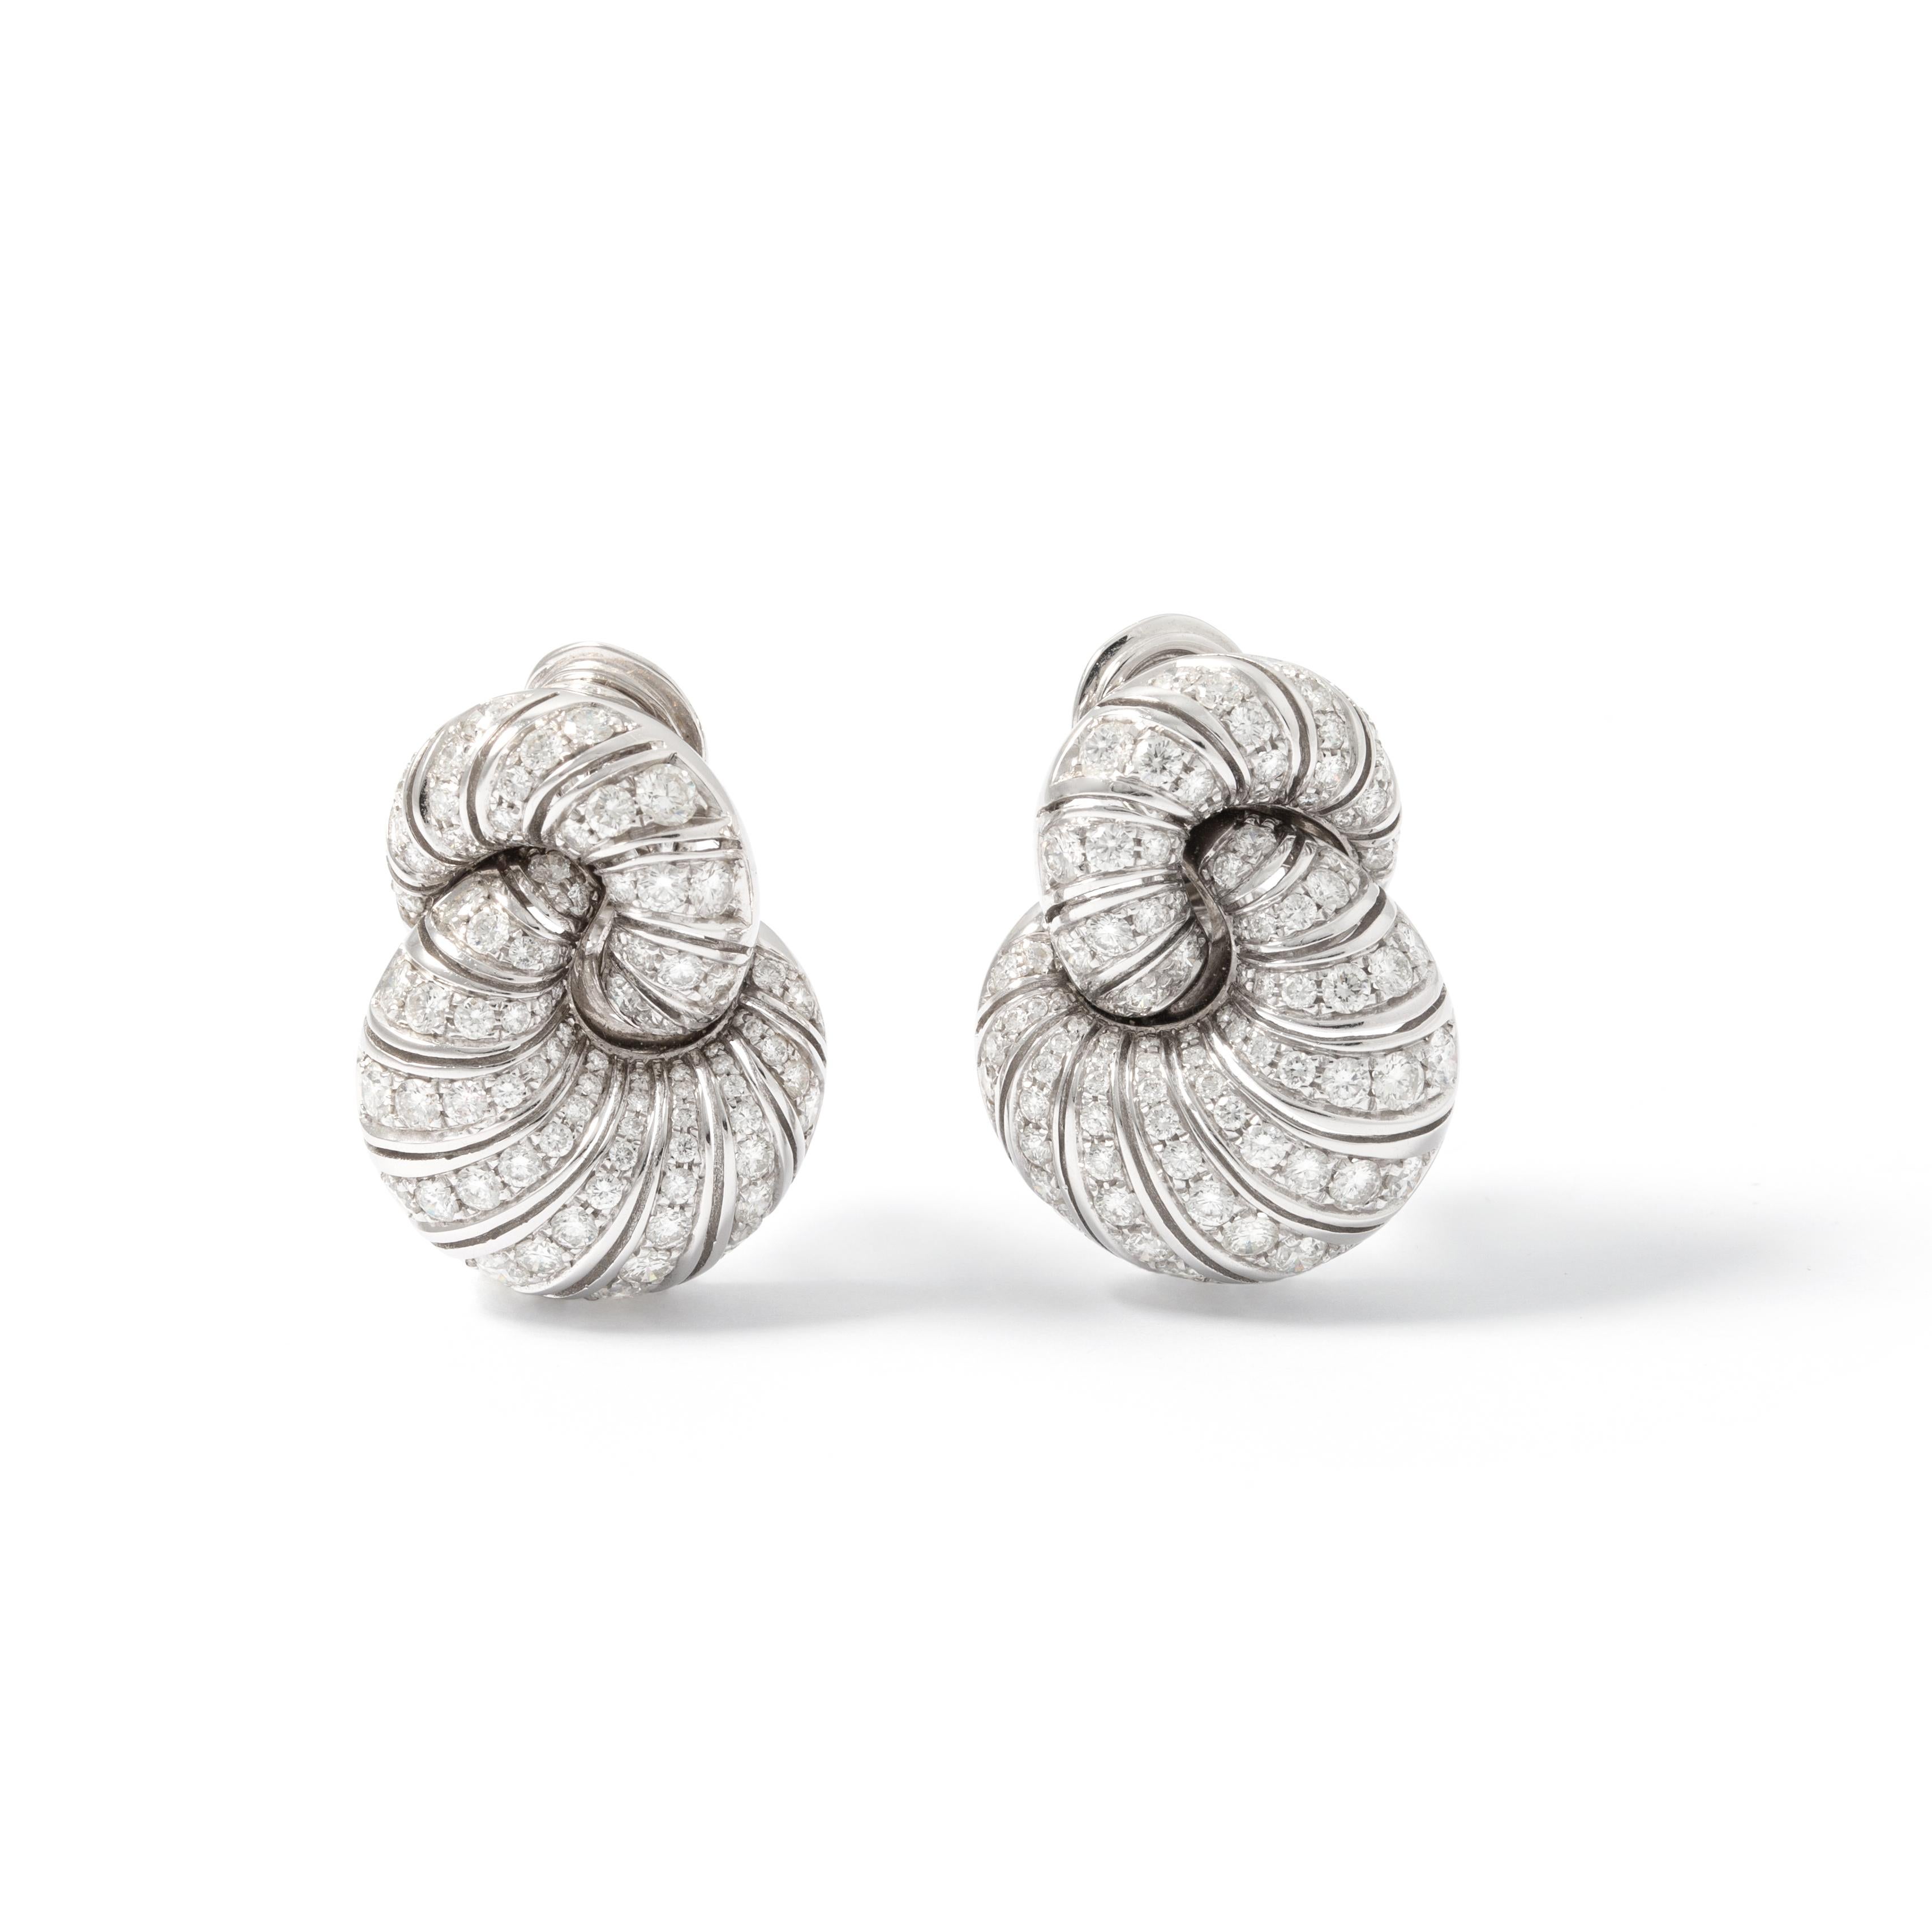 Diamond Earclips mounted on white gold 18K.
Height: 1.14 inches (2.90 centimeters).
Width: 0.83 inch (2.10 centimeters).

Gross weight: 27.82 grams.